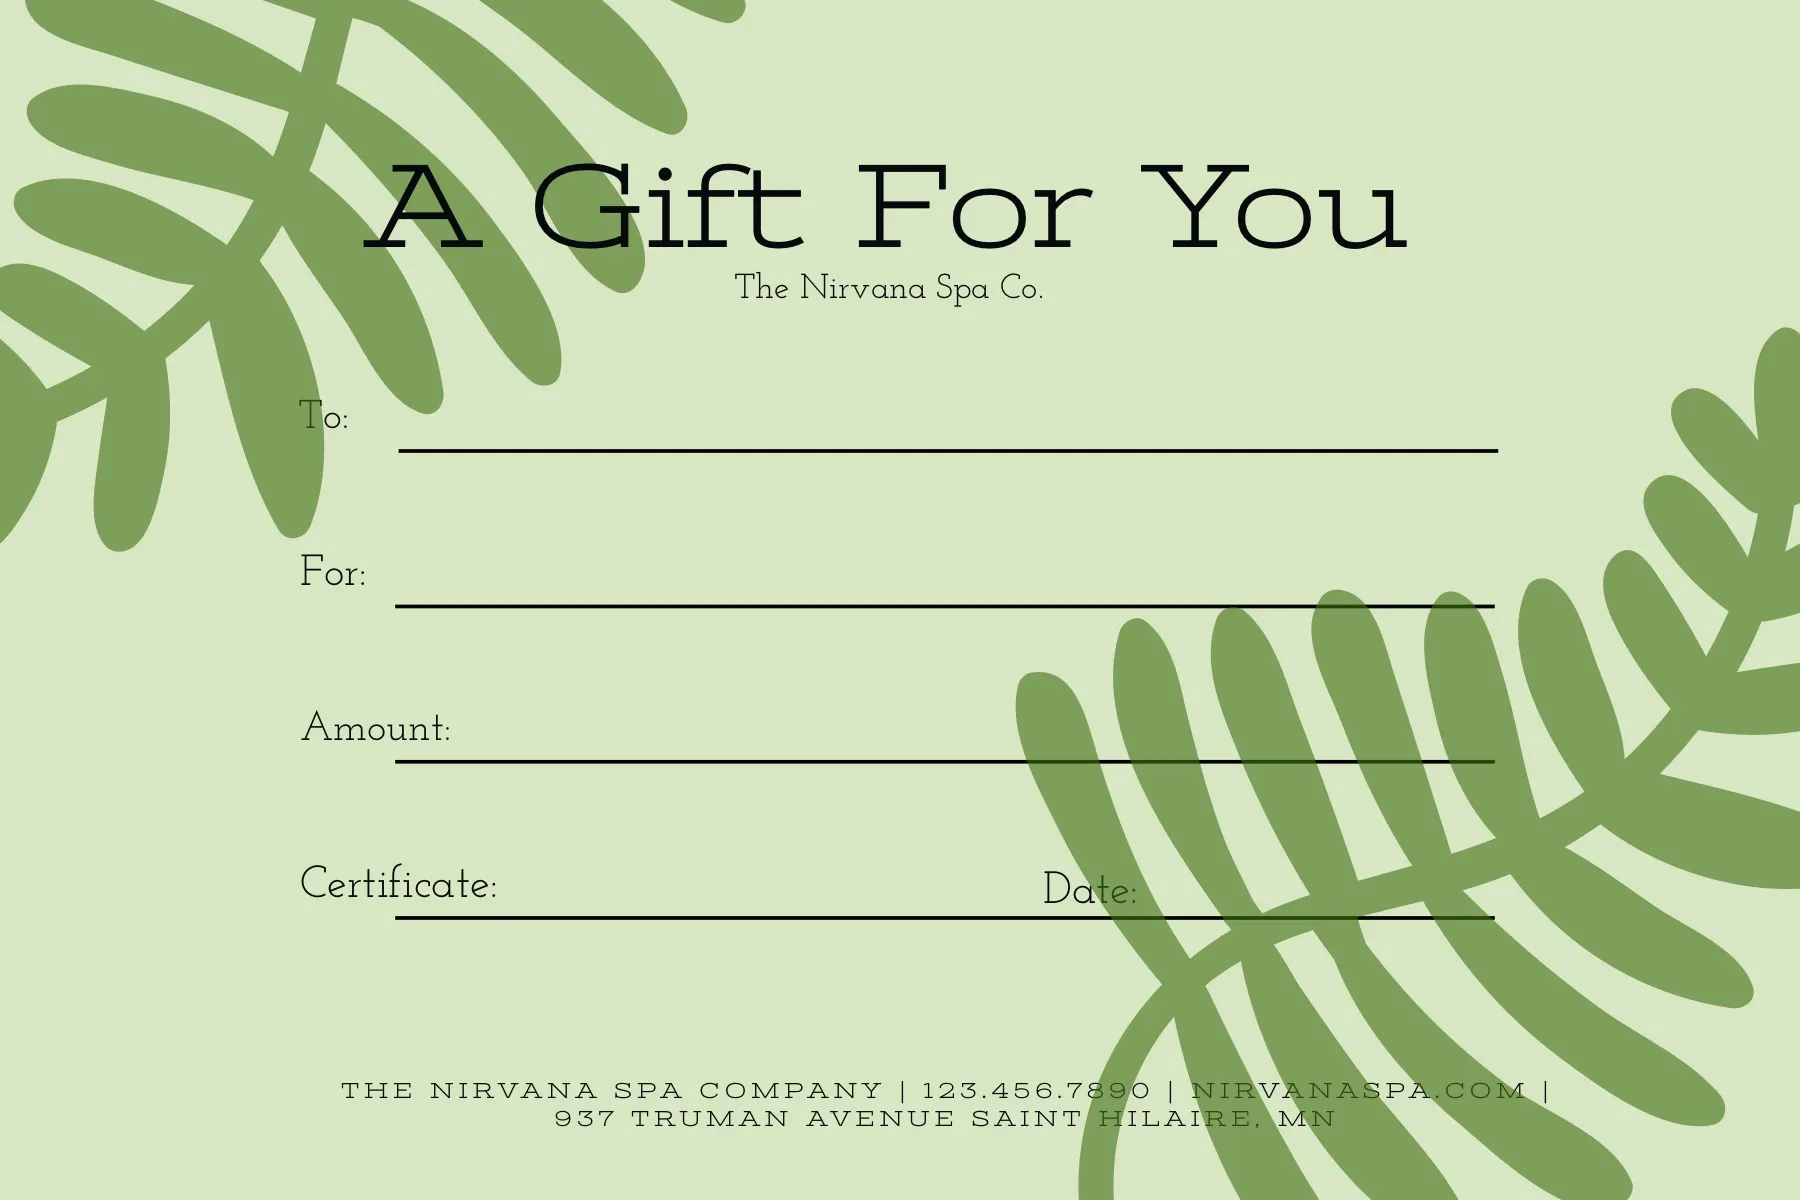 Free Gift Certificate Templates: Make Gift Certificates Online Inside Homemade Christmas Gift Certificates Templates